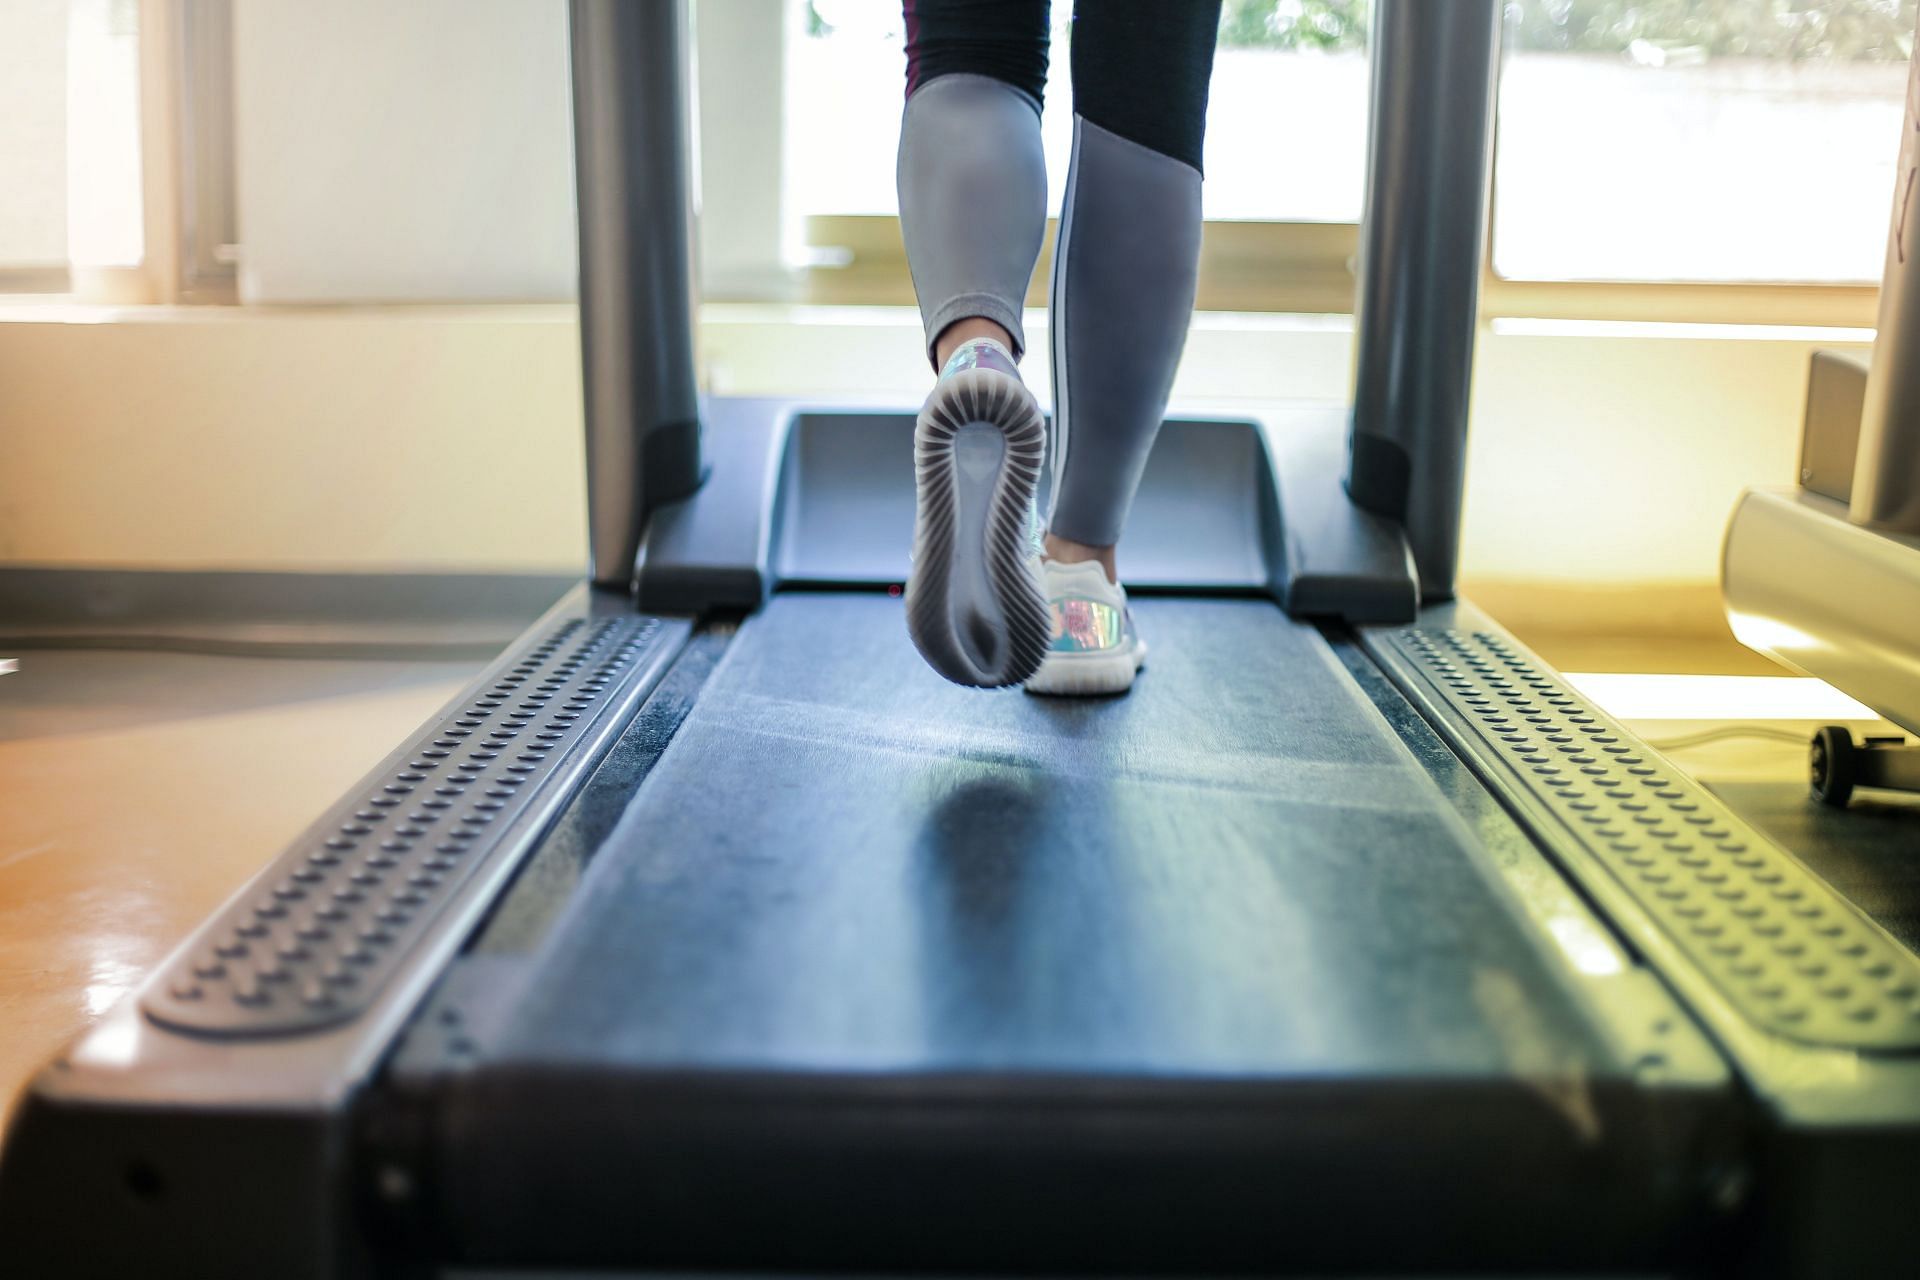 You should attempt treadmill incline exercises only if you can run on a flat treadmill without breaking a sweat for 30 minutes (Image via Pexels/Andrea Piacquadio)